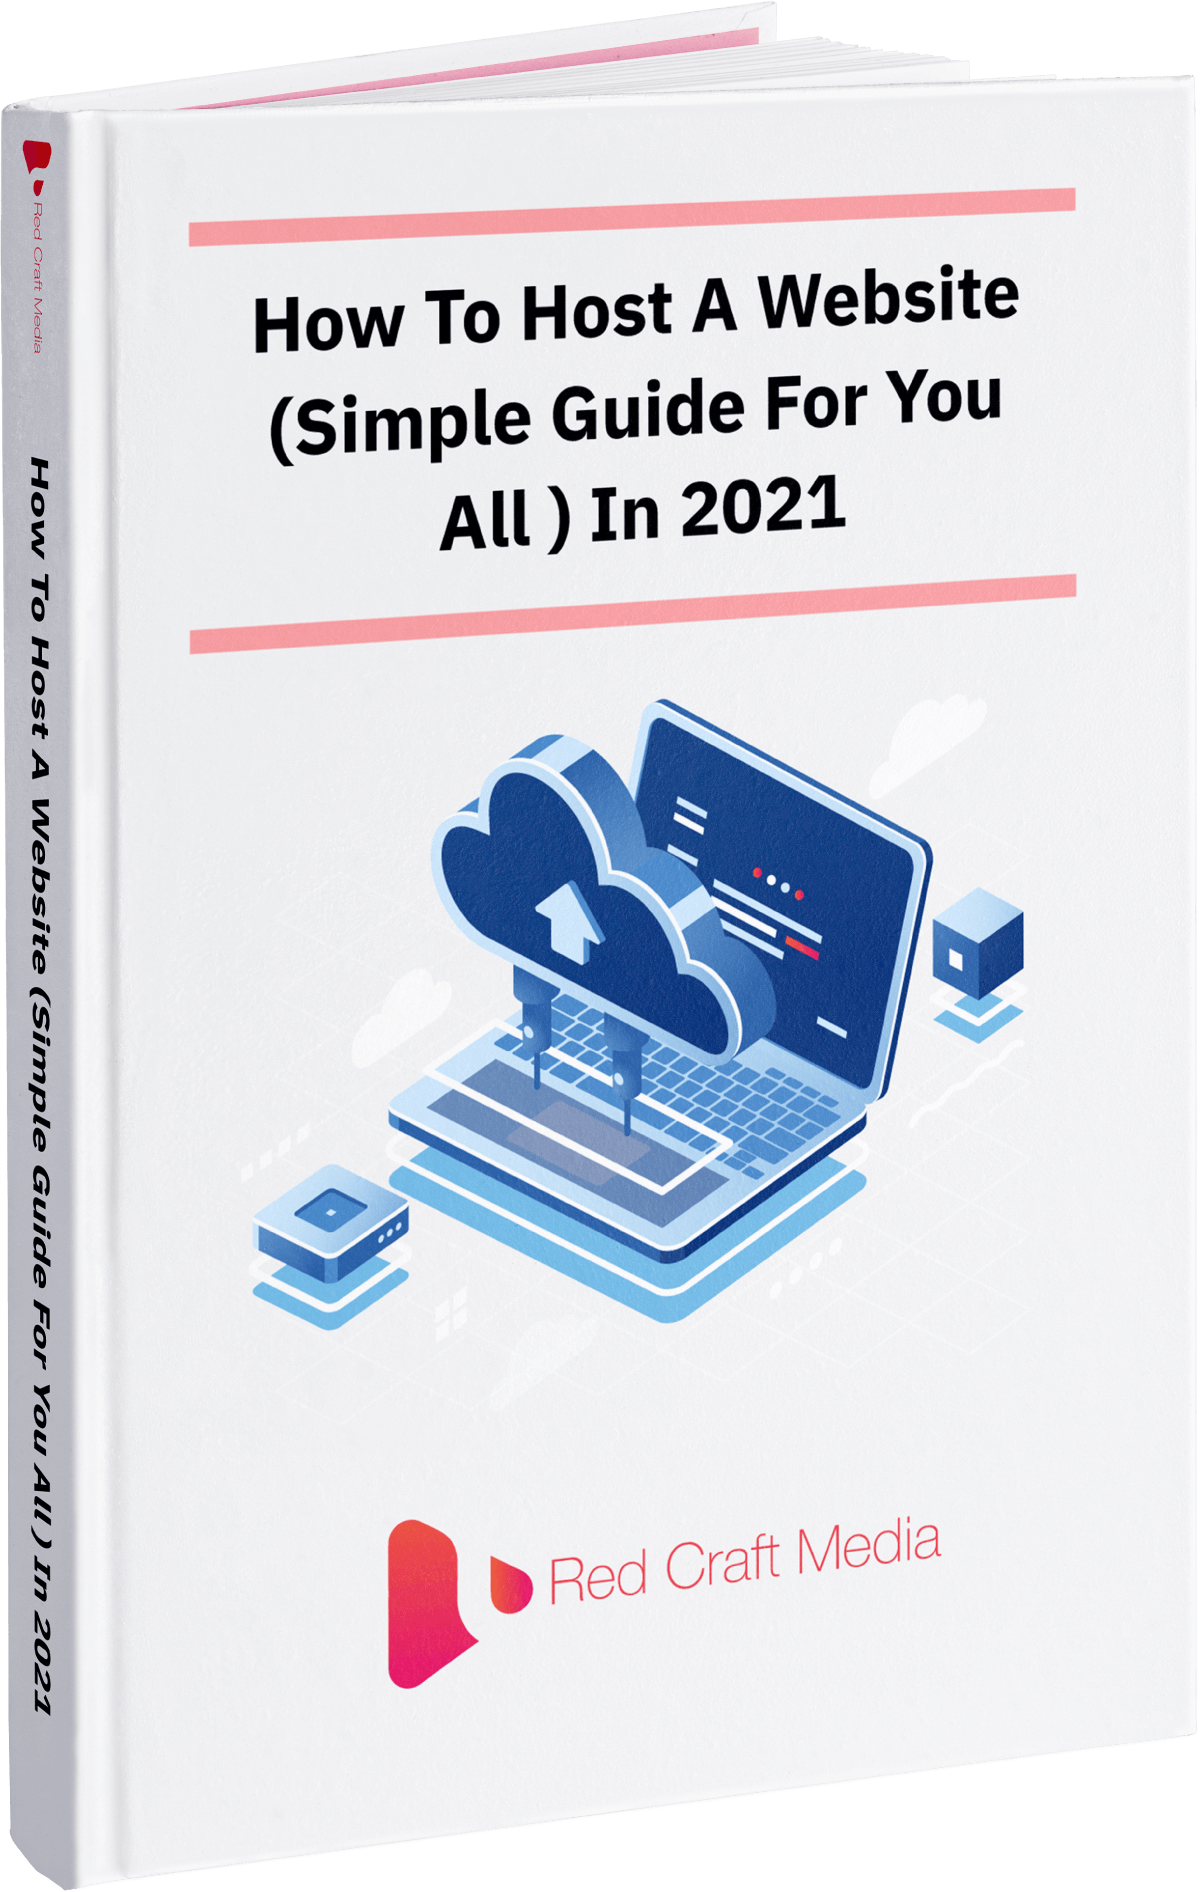 HOW TO HOST A WEBSITE (SIMPLE GUIDE FOR YOU ALL) IN 2021